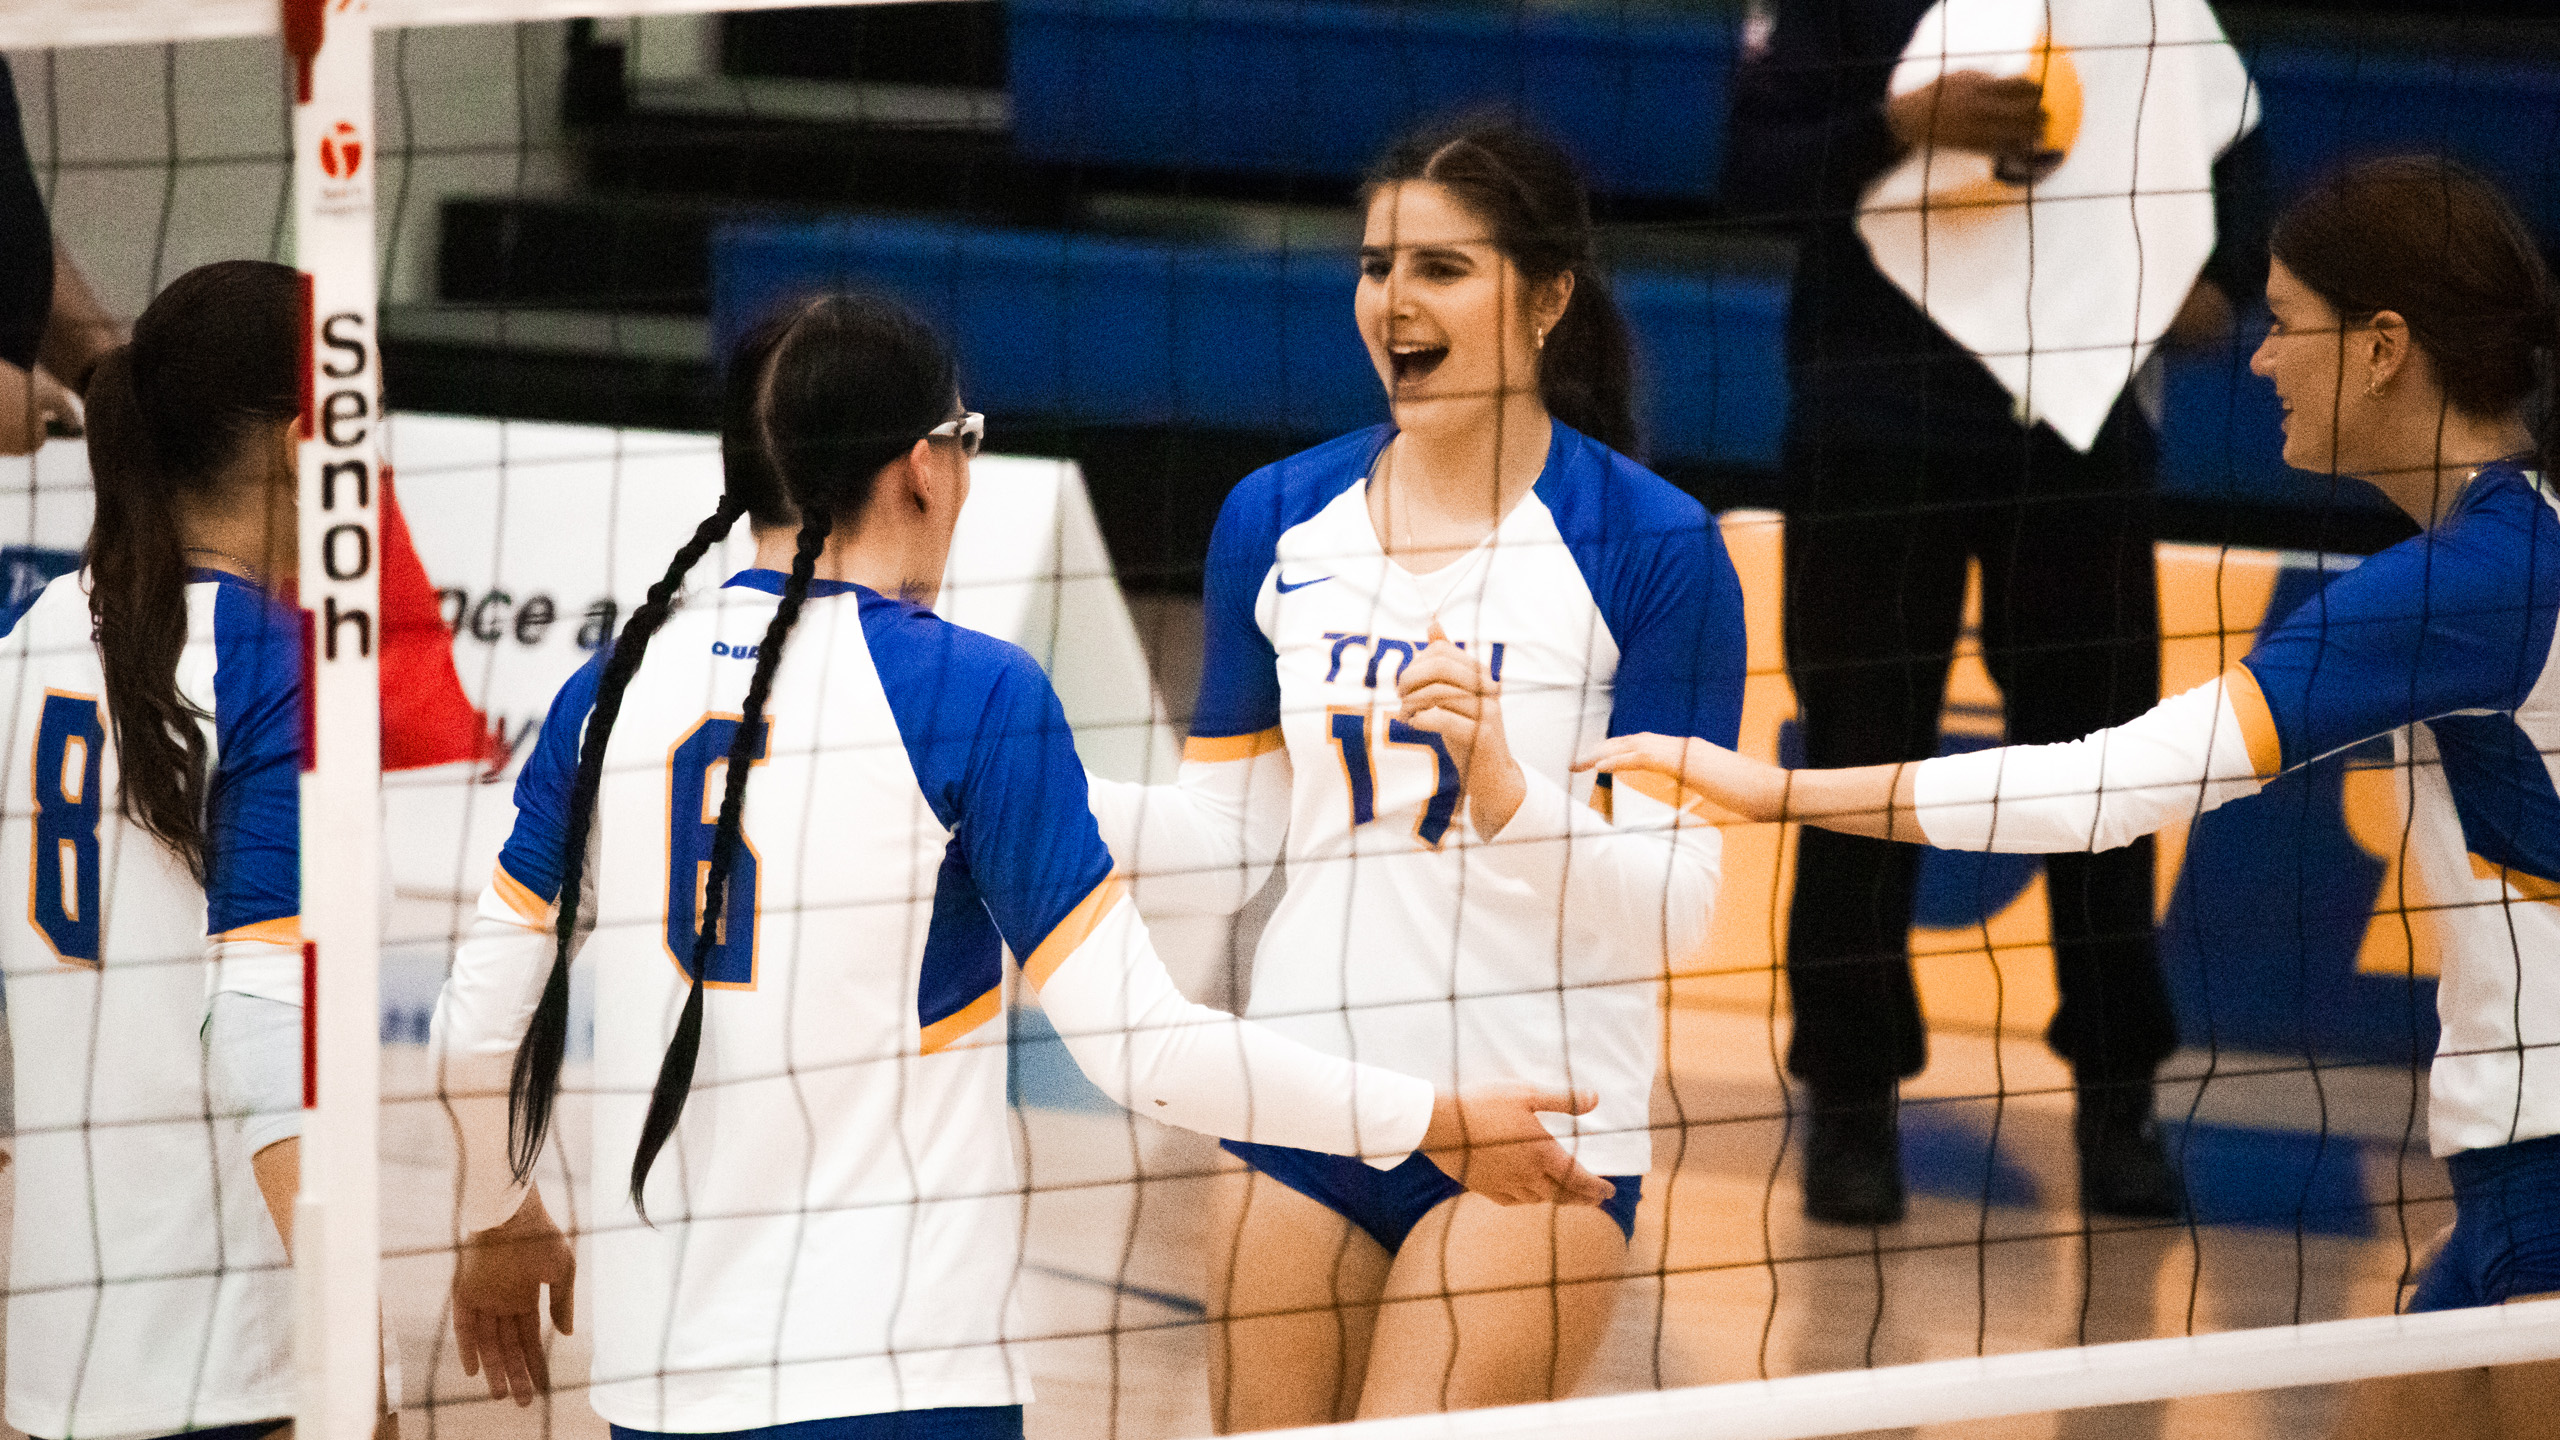 TMU women's volleyball screams in celebration of a point and high-fives her teammates